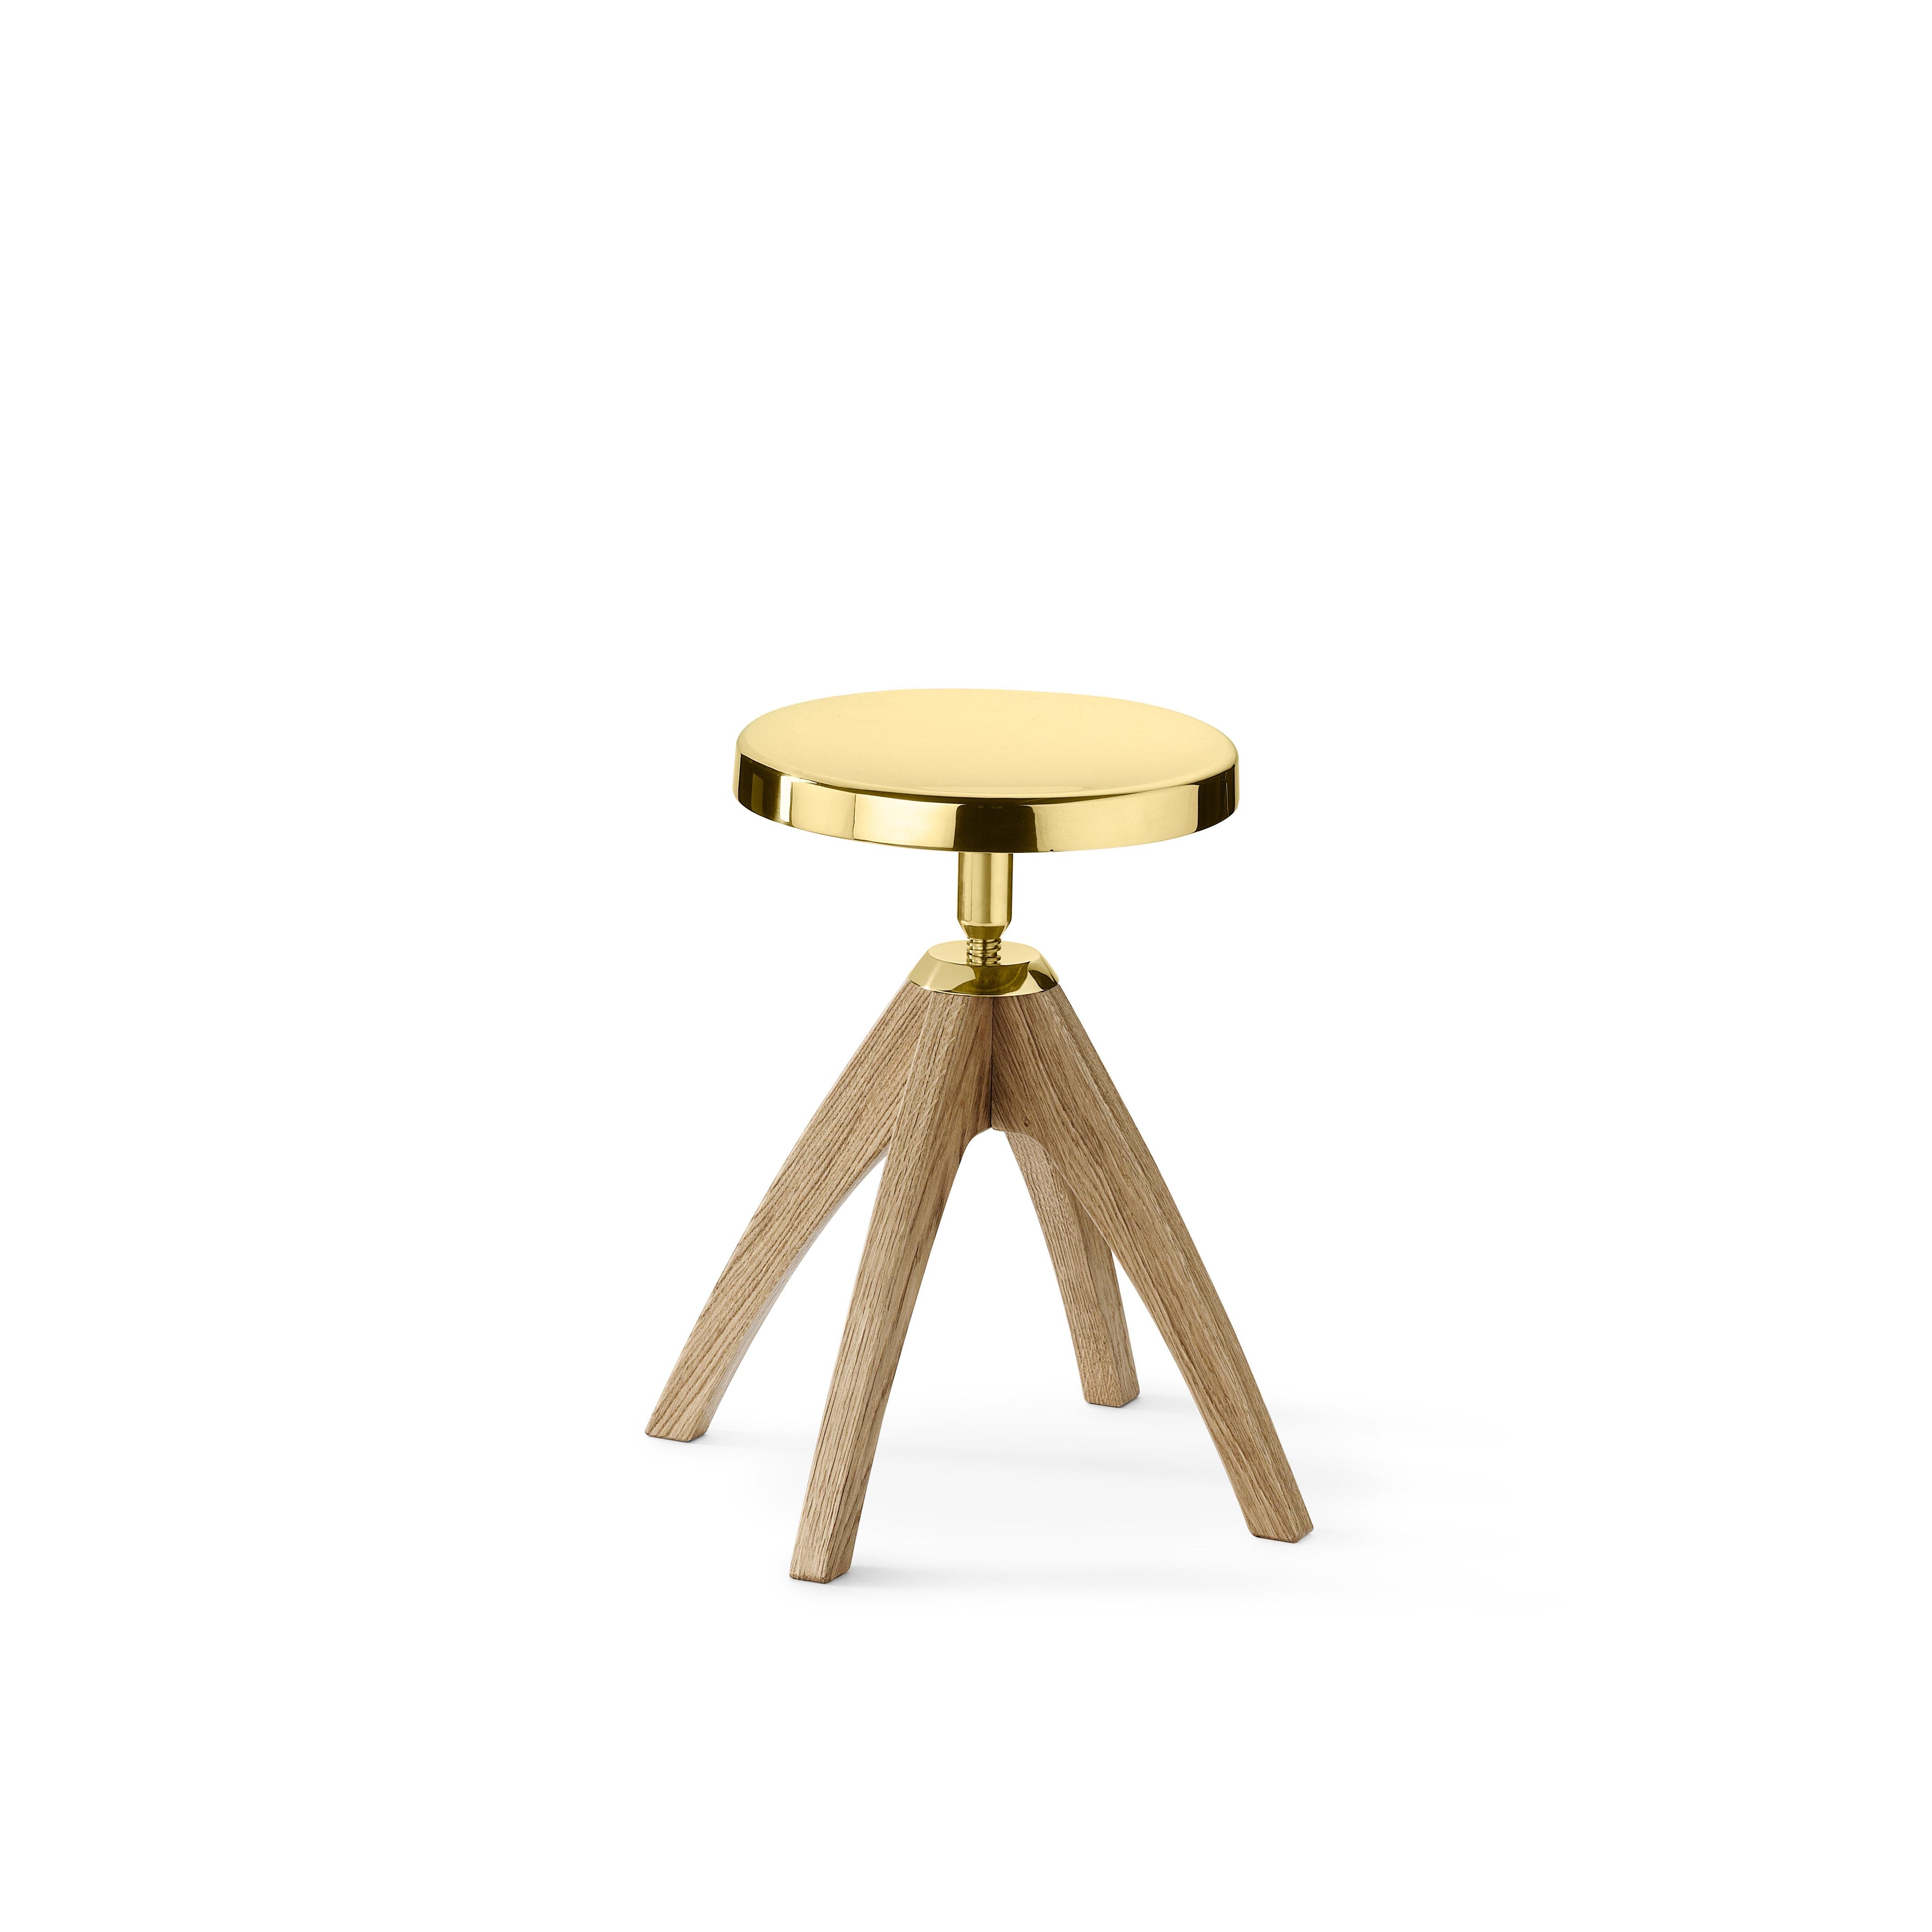 Stool in brass and light durmast
The height-adjustable stool, subject of which you can appreciate the adaptability with a gesture, in different contexts and users, becomes a precious object, with light or dark oak legs slightly bent and round seat